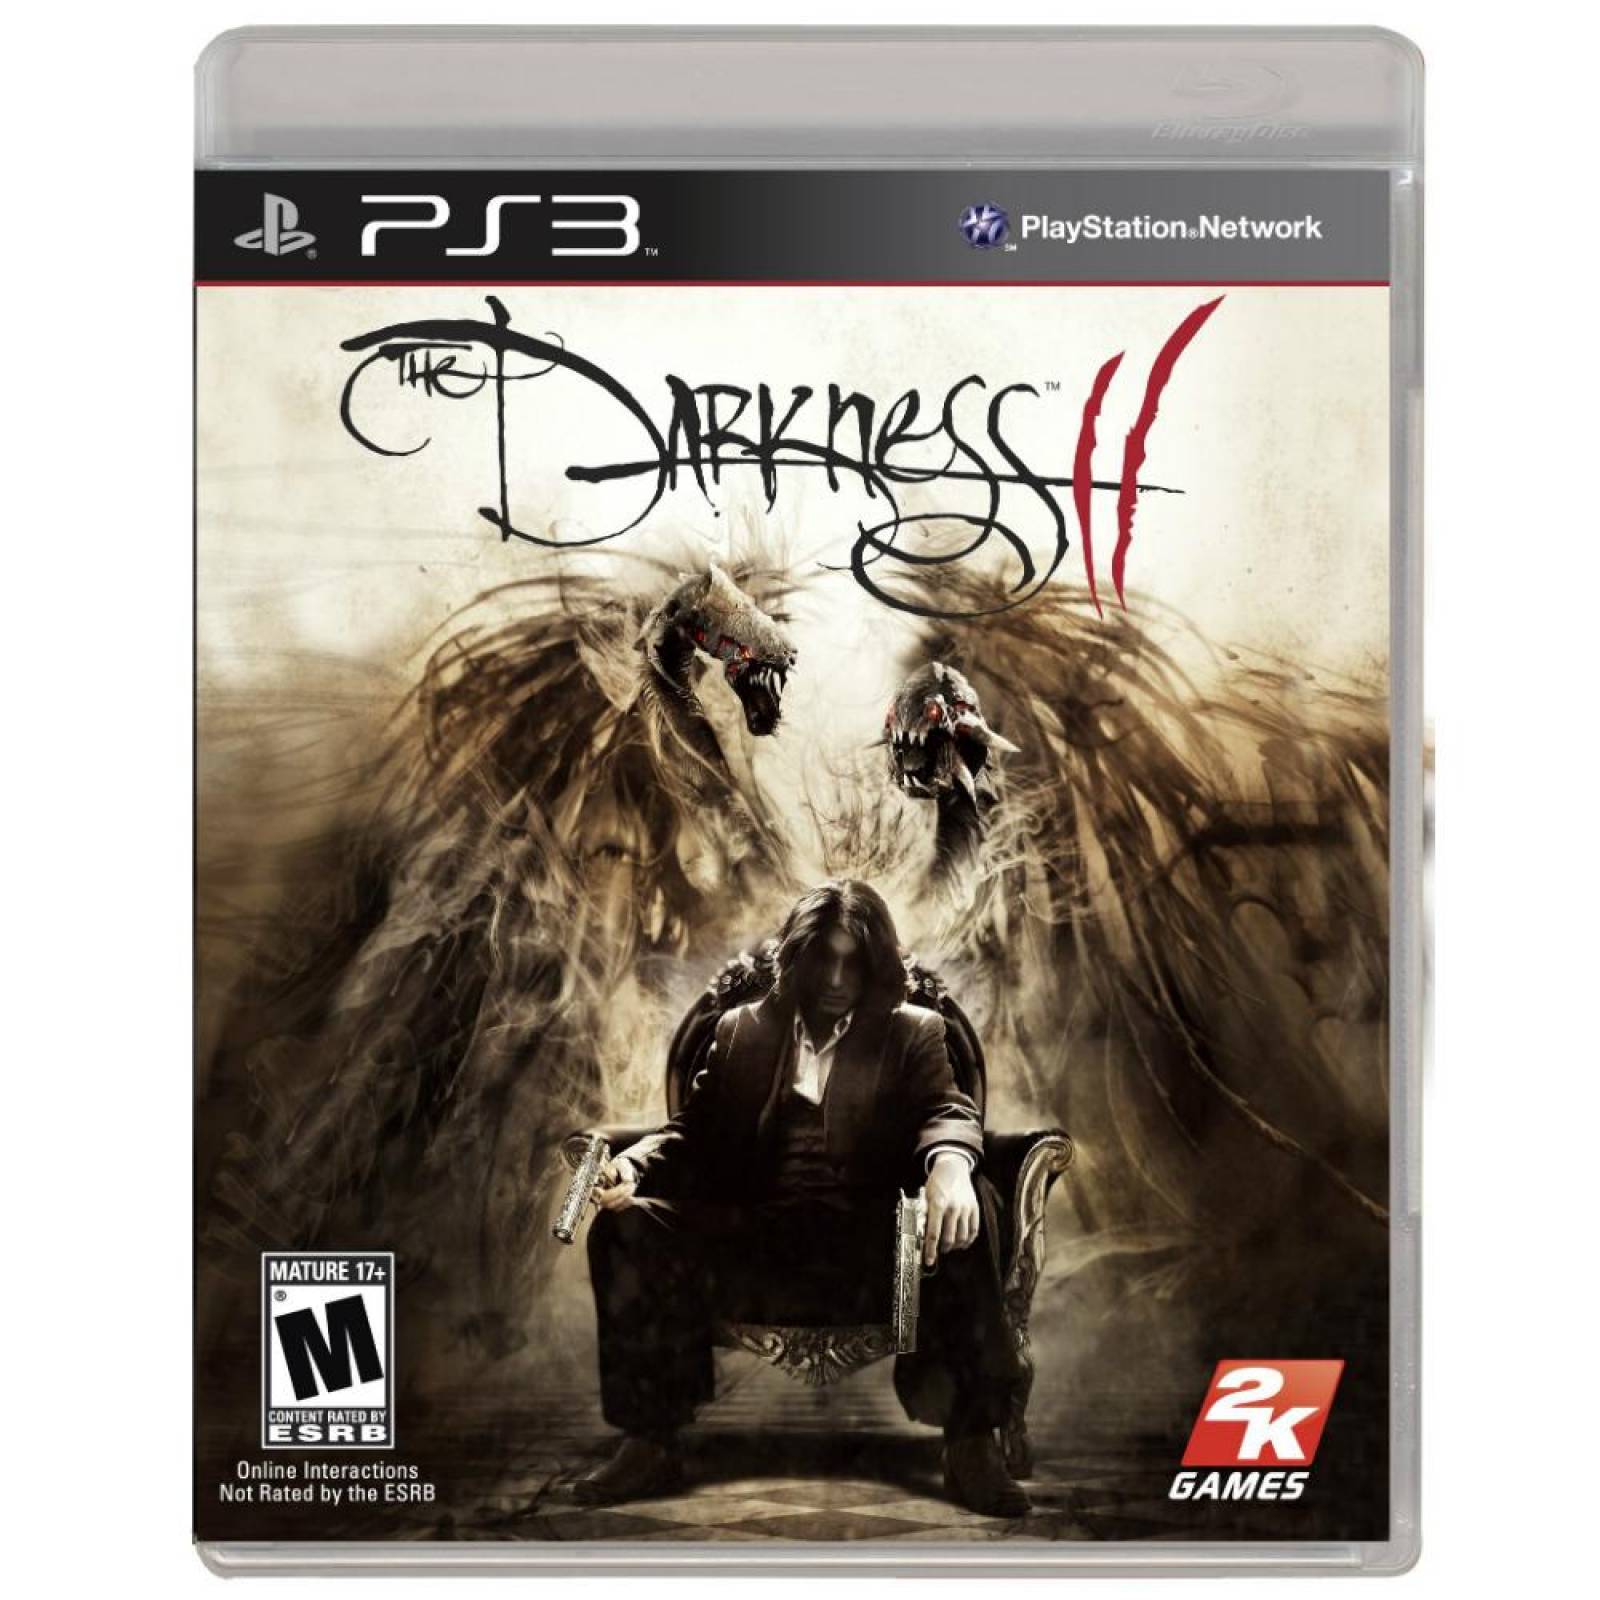 THE DARKNESS II PS3 S001 